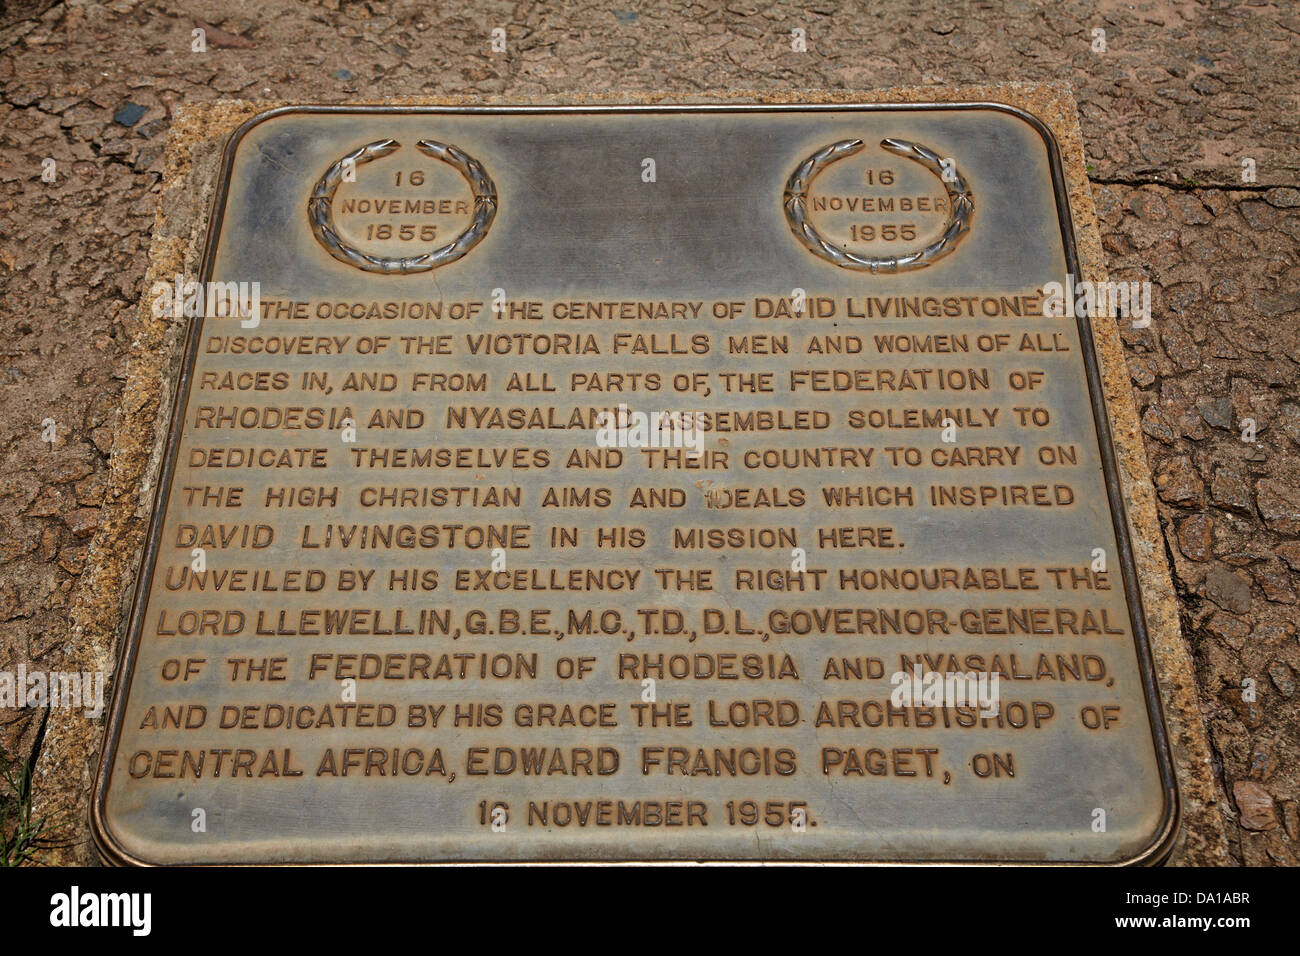 Plaque commemorating David Livingstone's discovery, Victoria Falls, Zimbabwe, Southern Africa Stock Photo